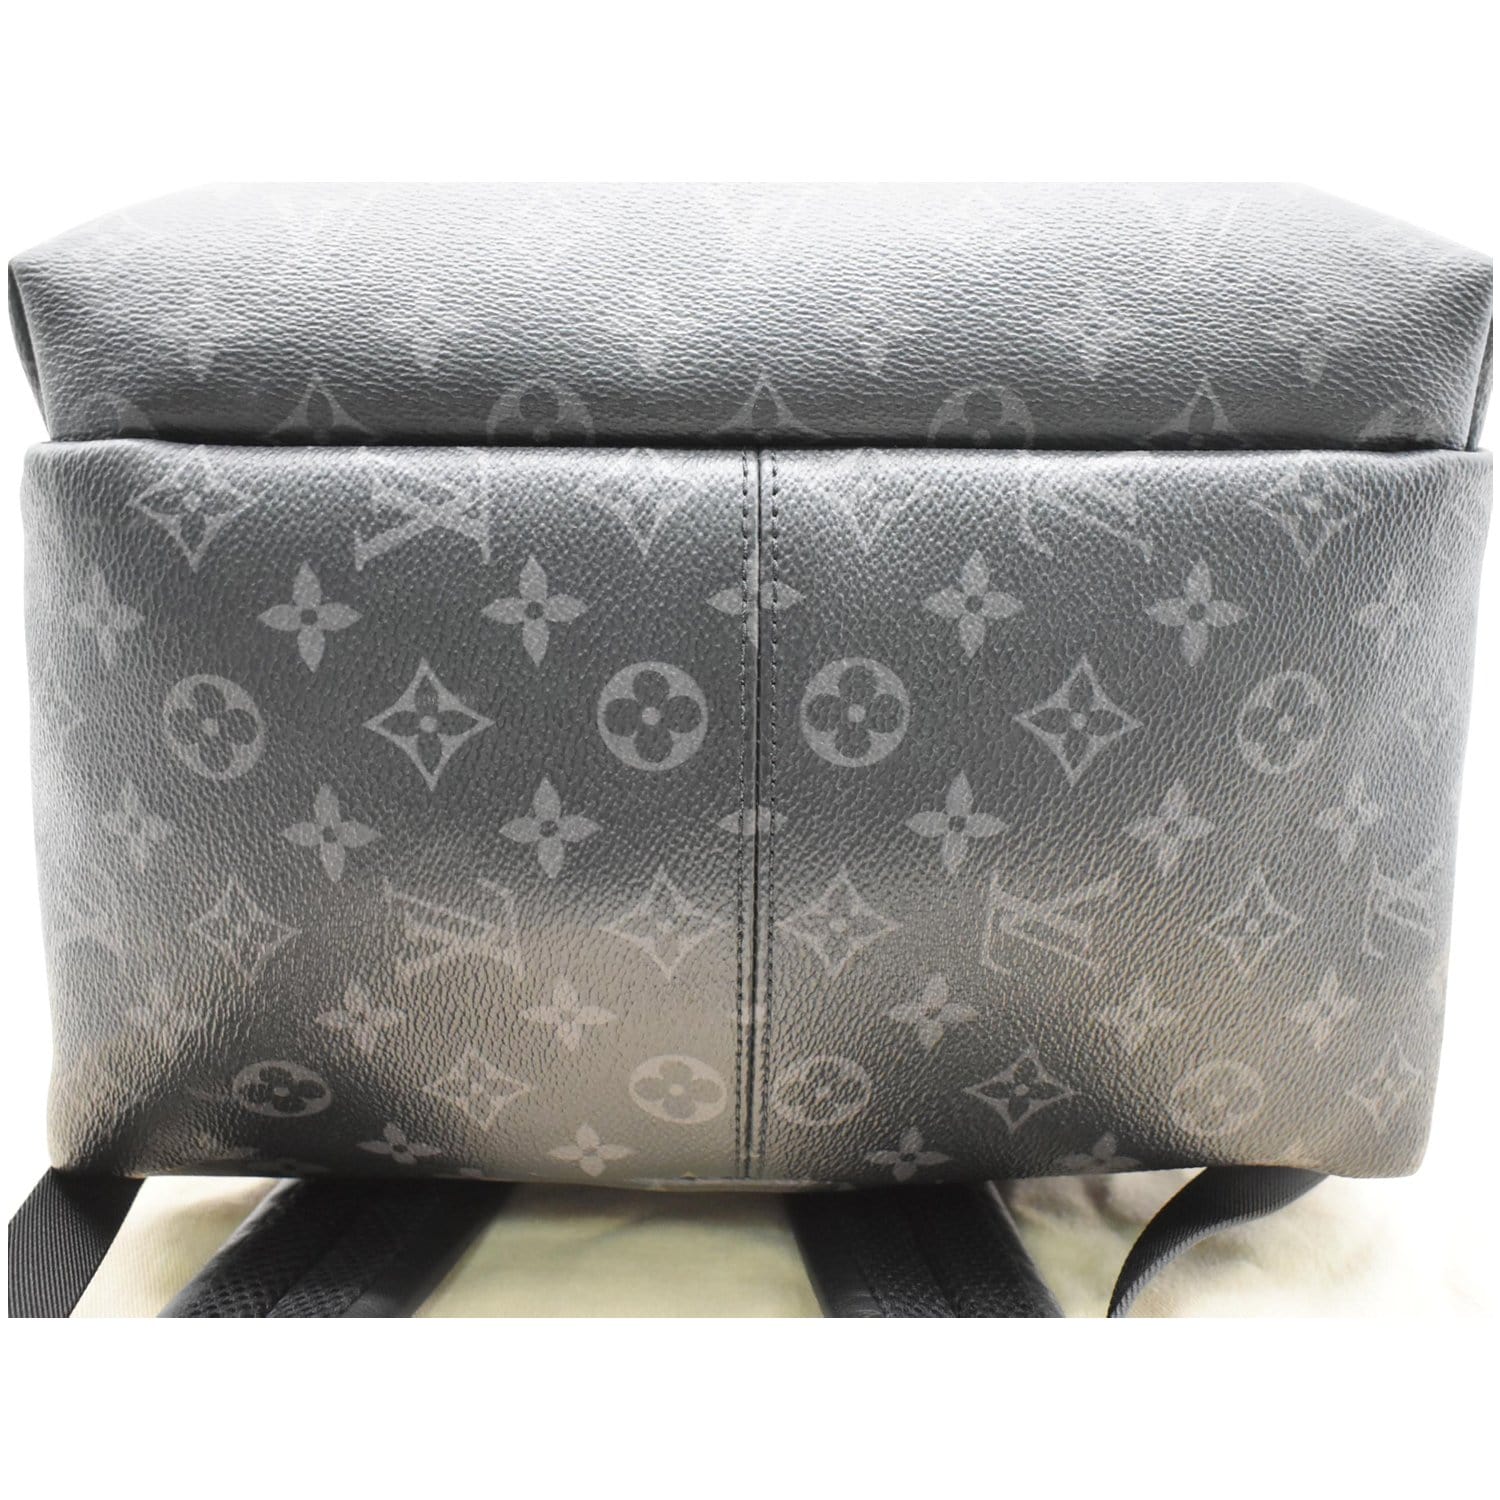 LOUIS VUITTON DISCOVERY BACKPACK PM MONOGRAM ECLIPSE - LVB008